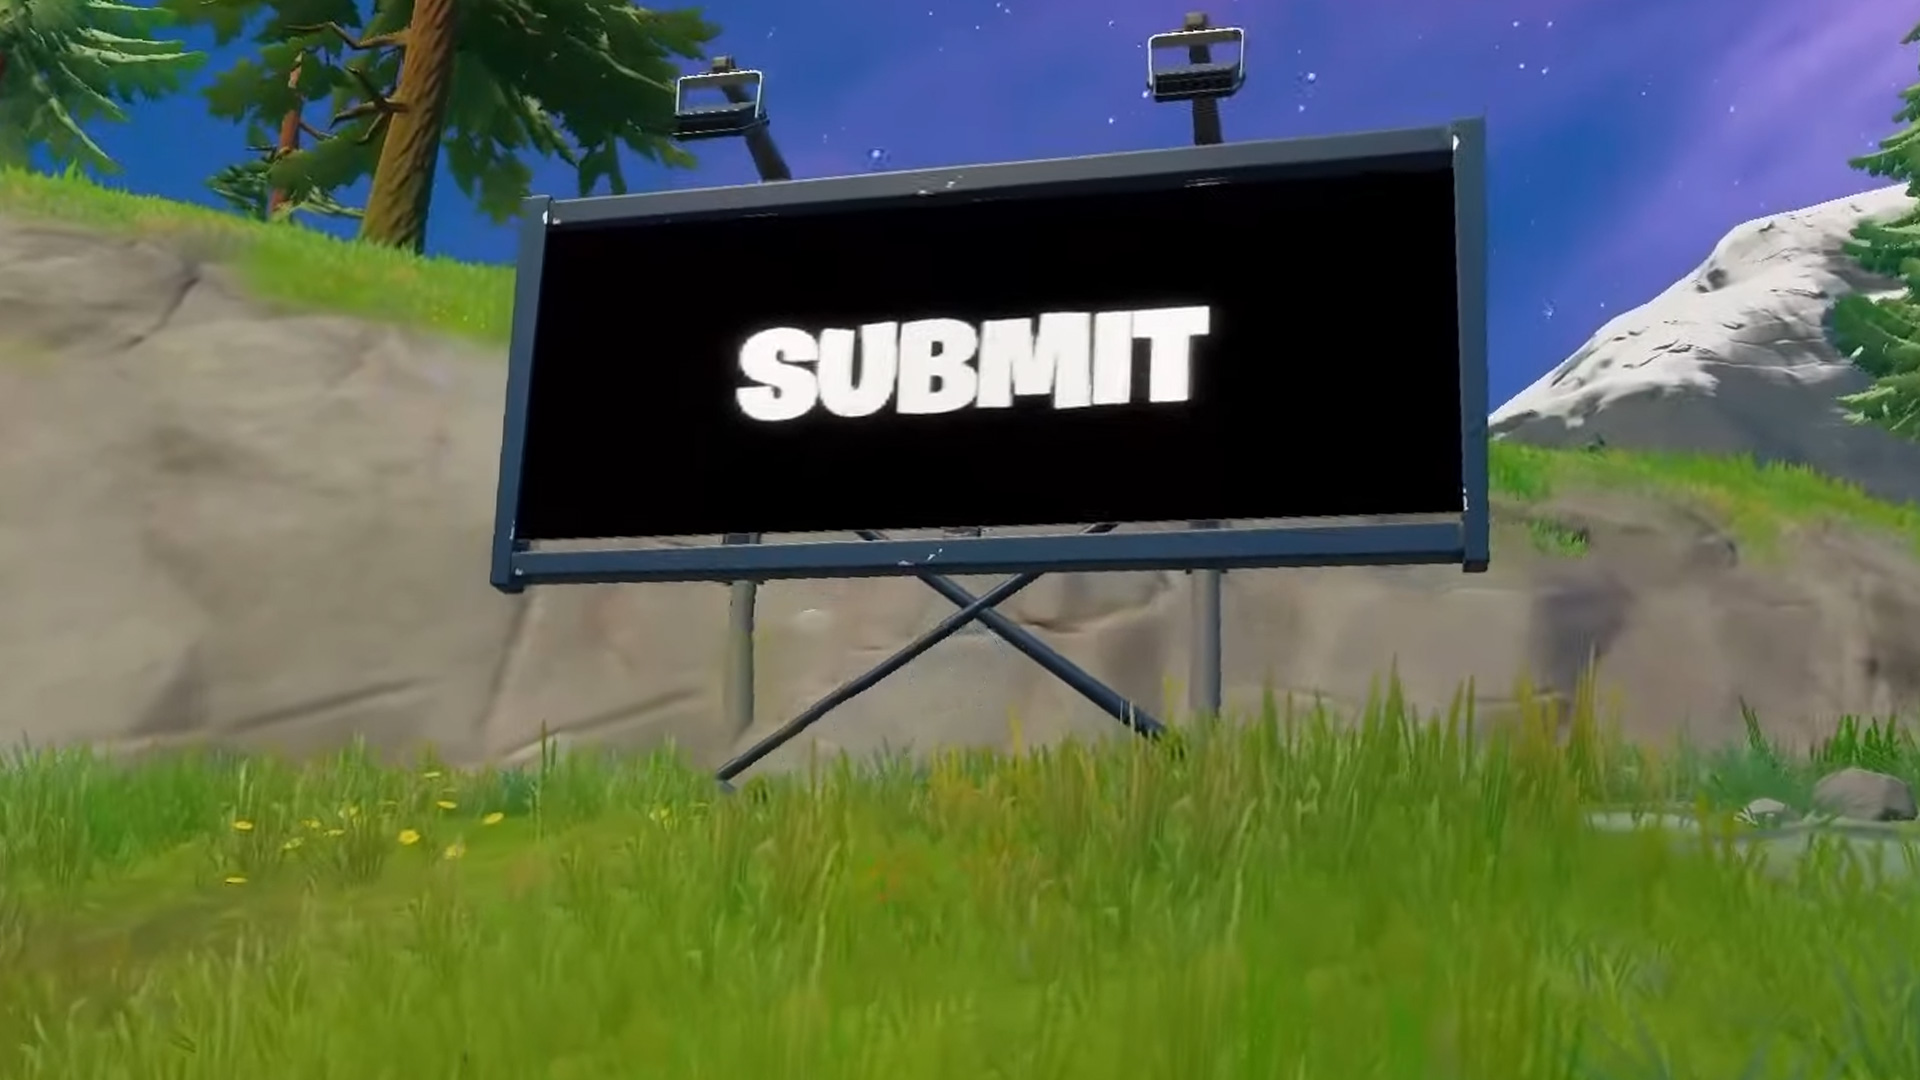 Where to find a detector to disable an alien billboard in Fortnite